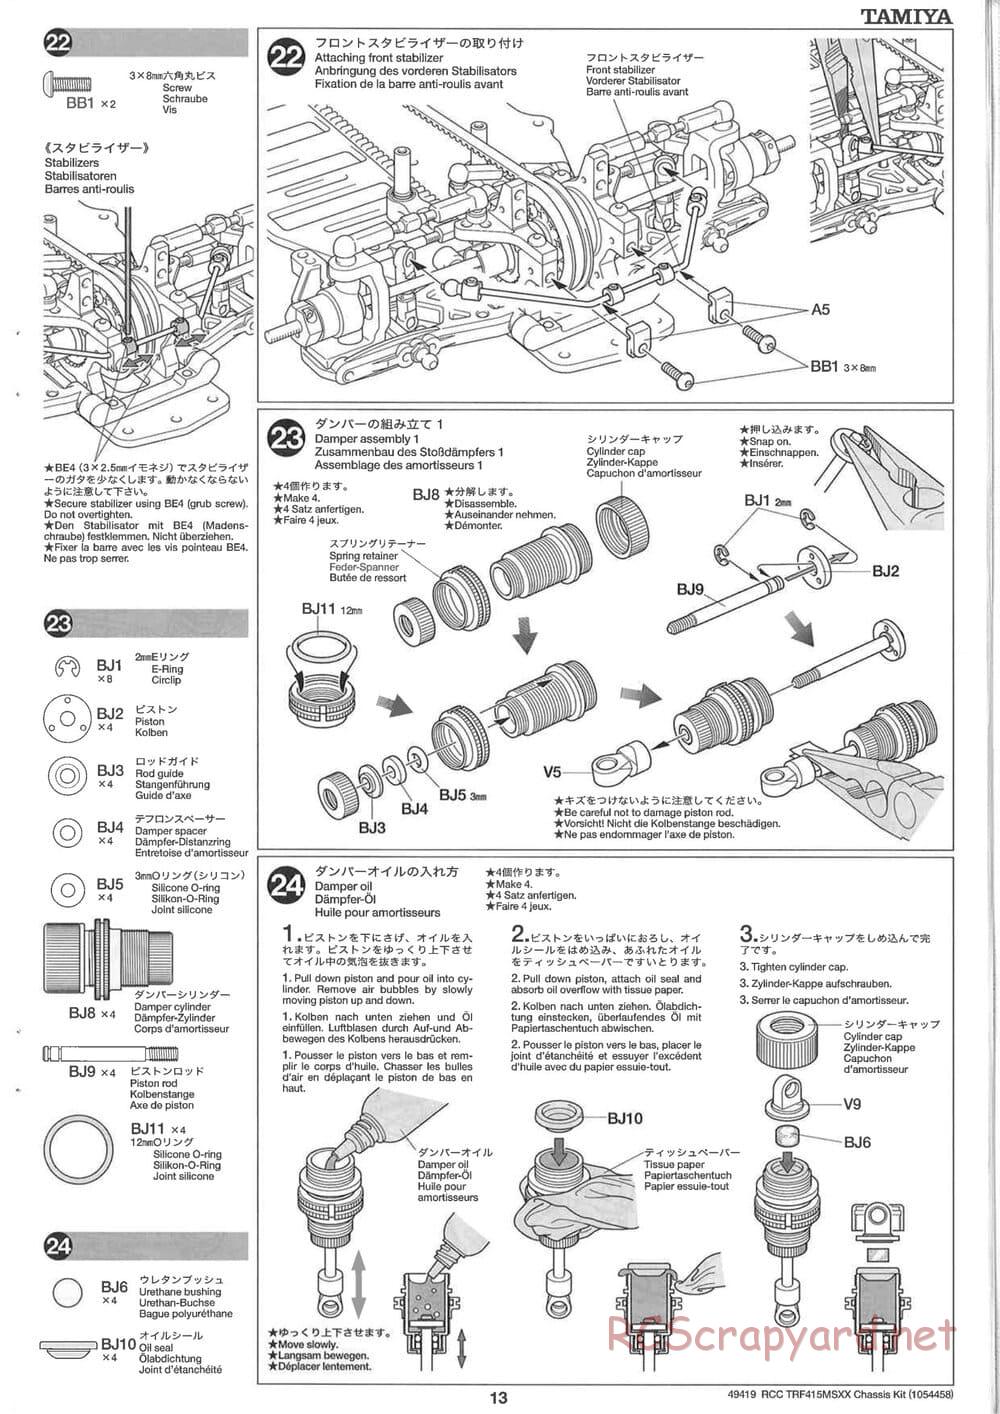 Tamiya - TRF415-MSXX Chassis - Manual - Page 13